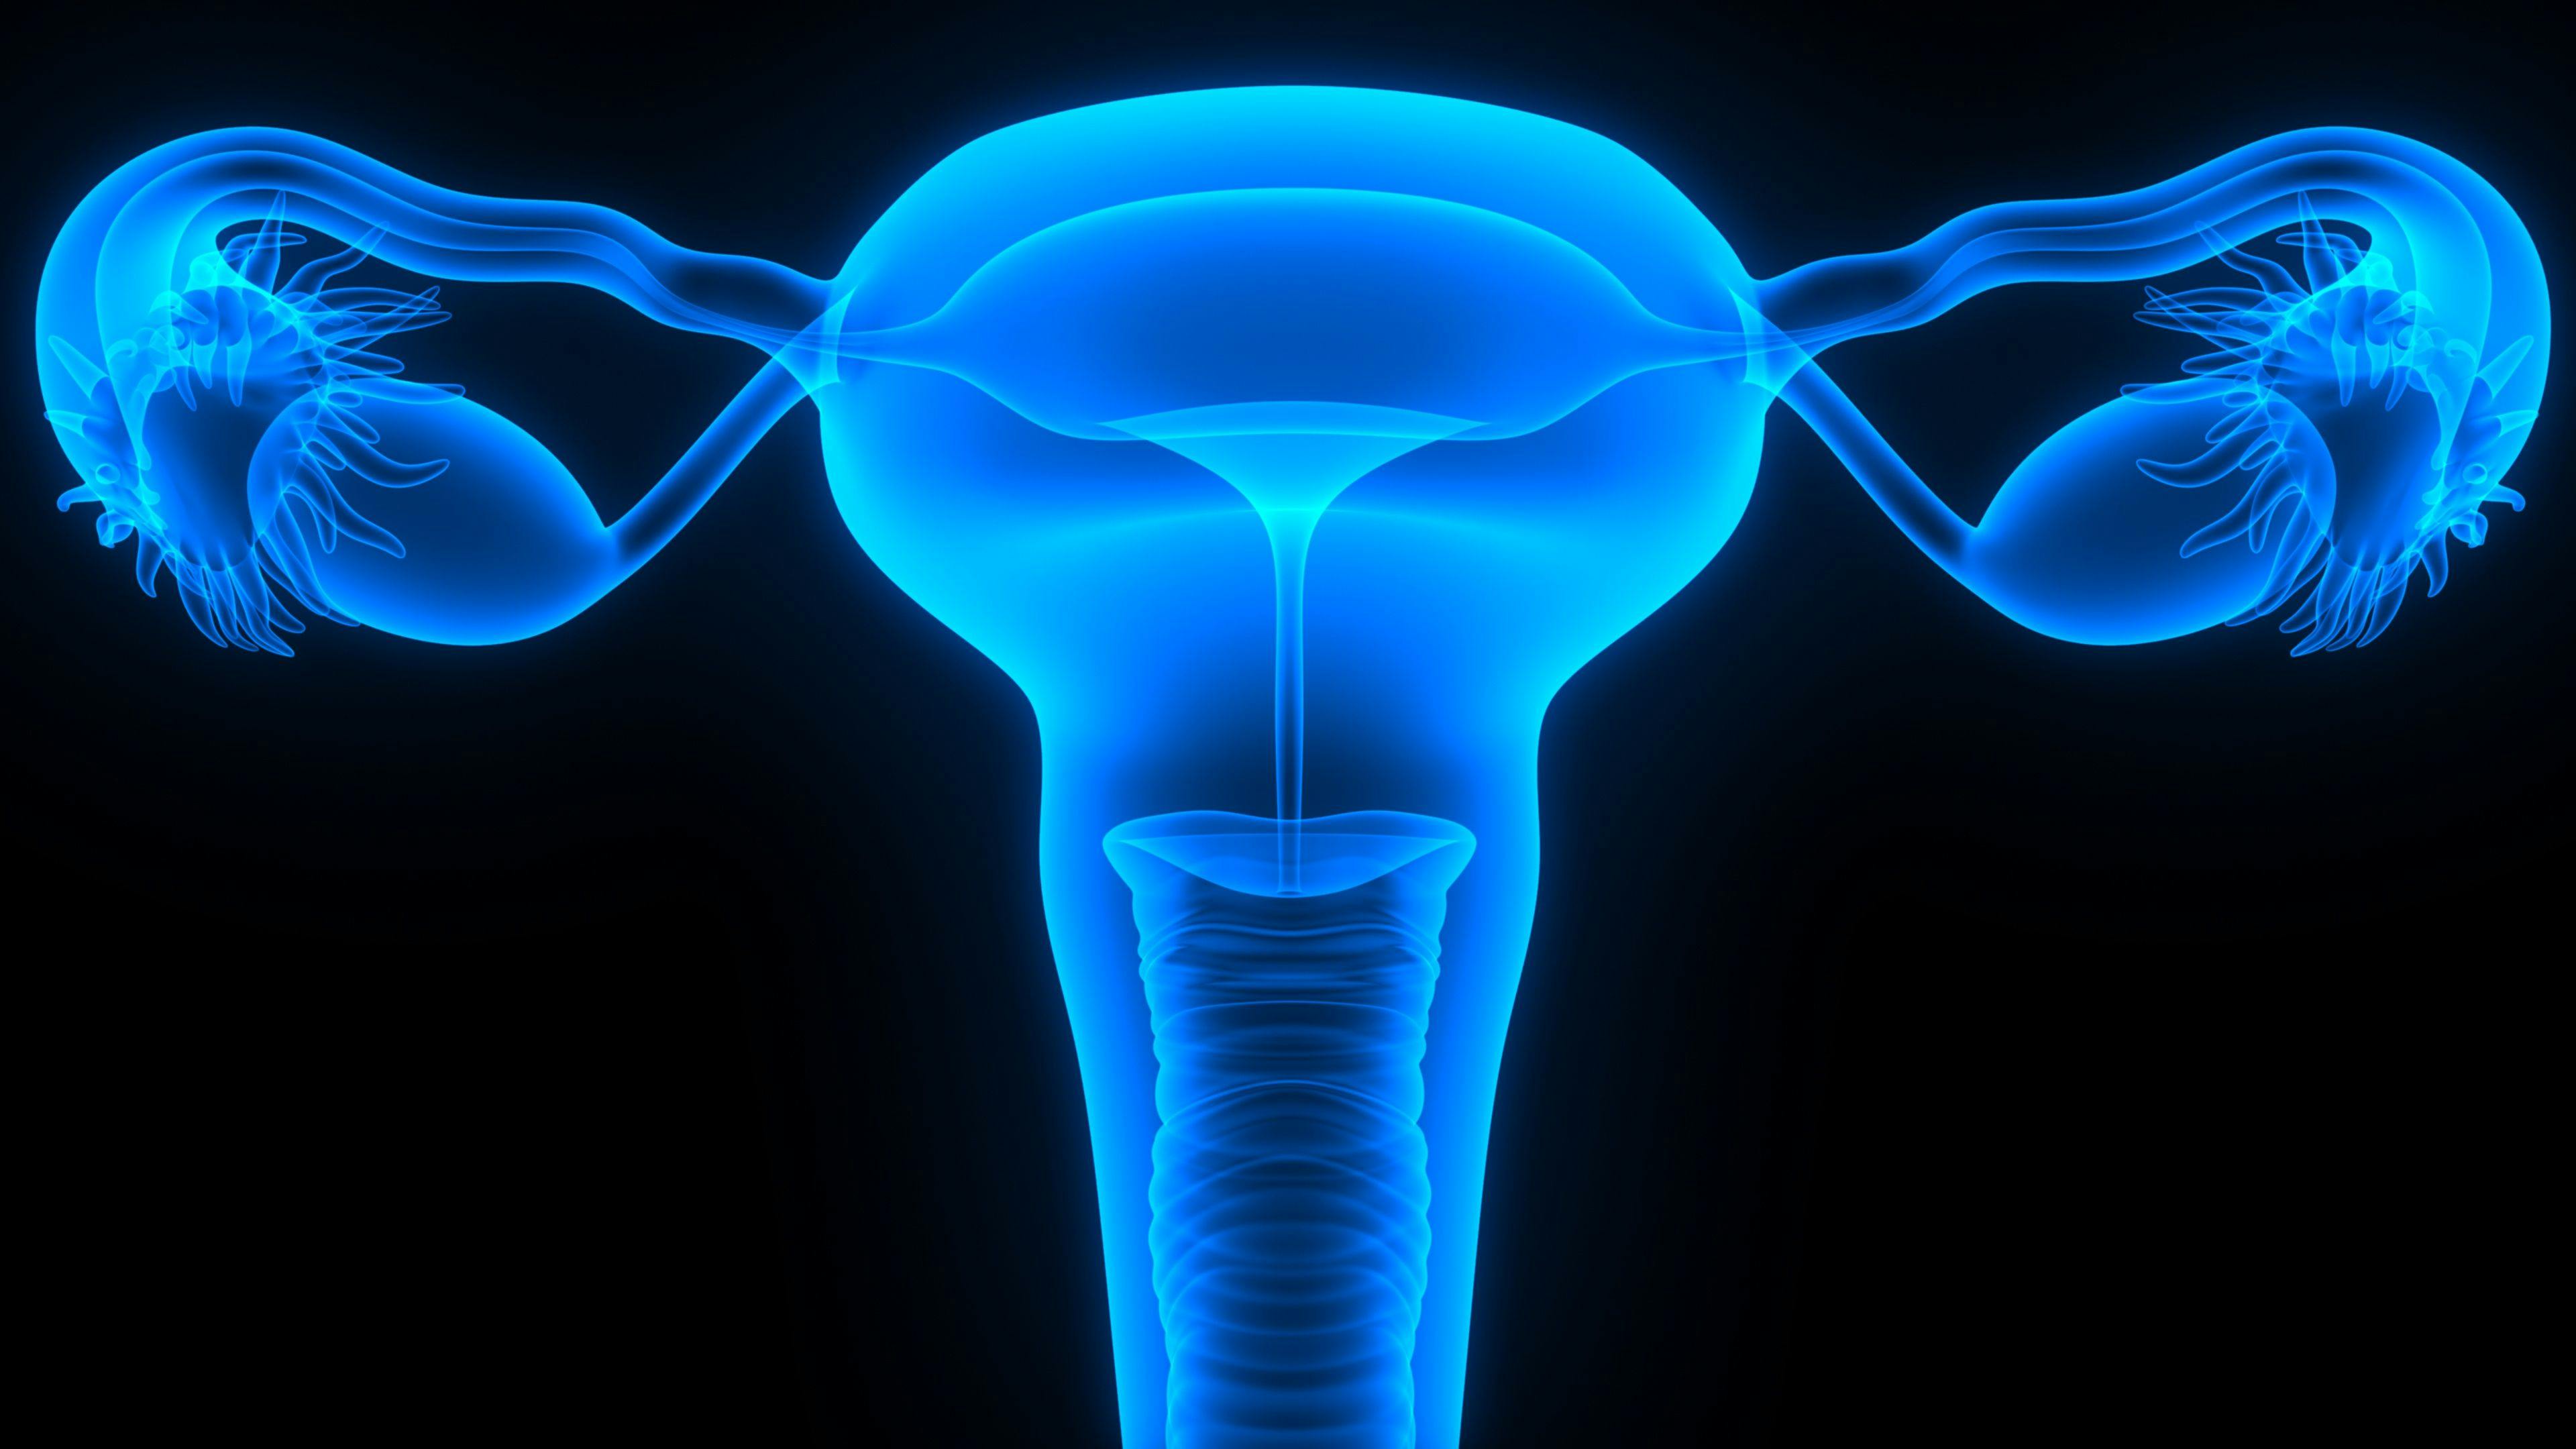 Advanced Cervical Cancer Shows No Survival Benefit With Adjuvant Chemotherapy